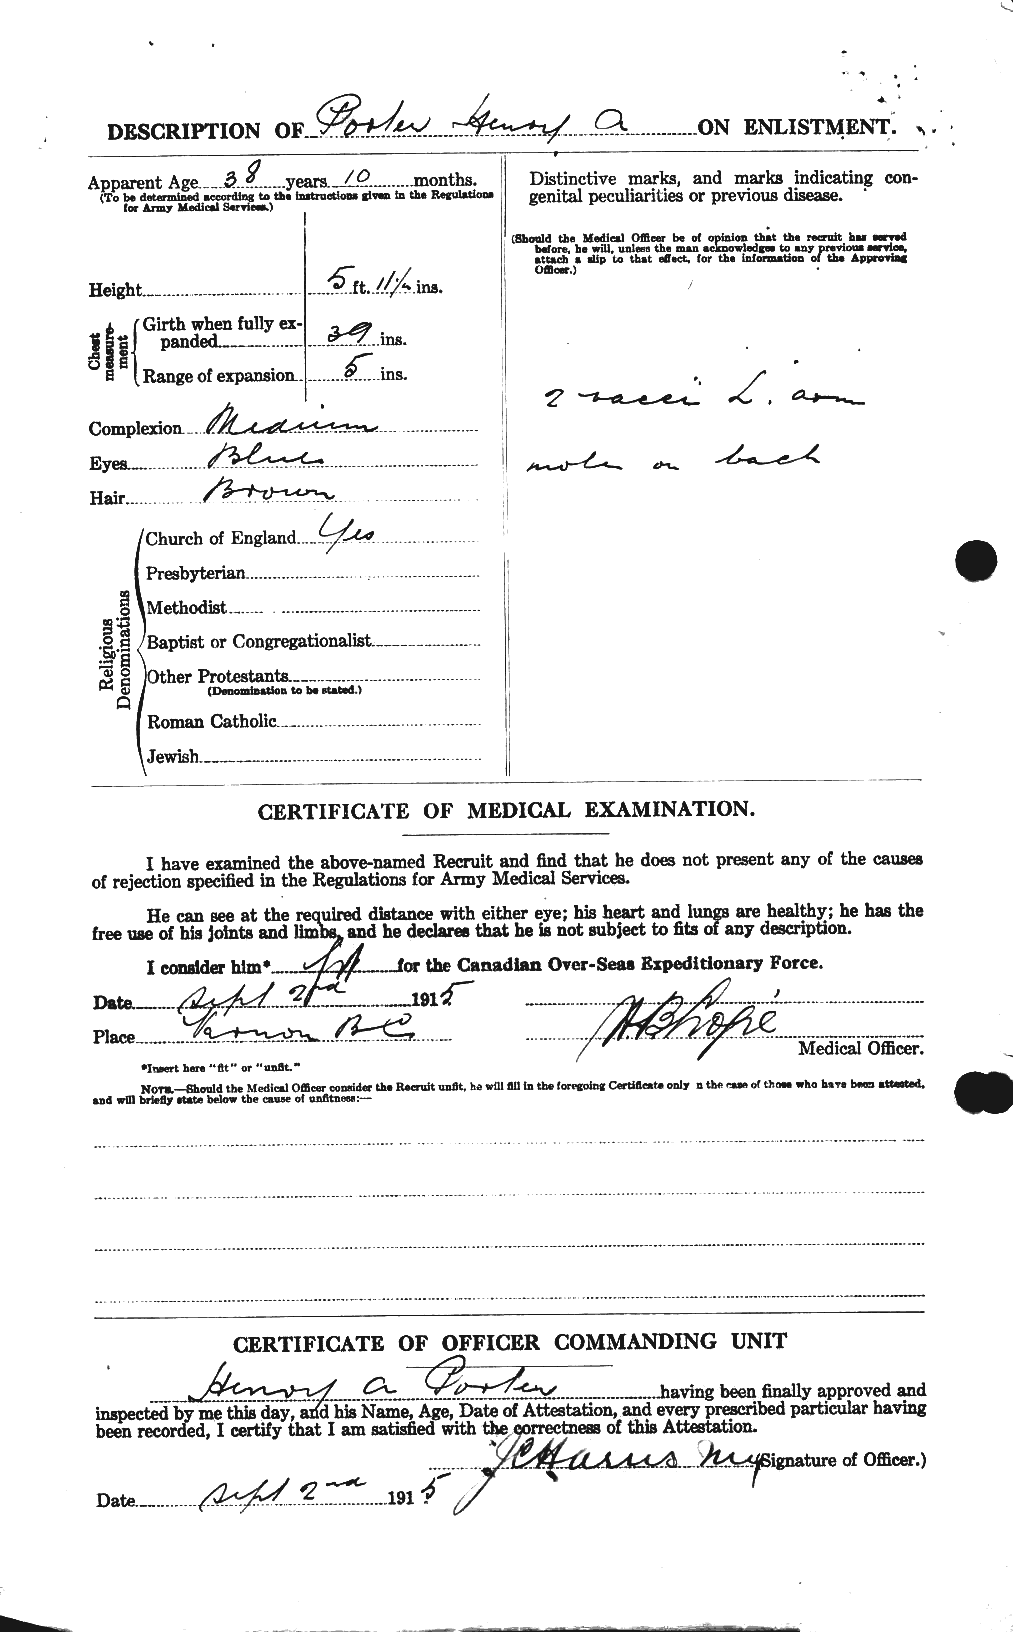 Personnel Records of the First World War - CEF 583634b